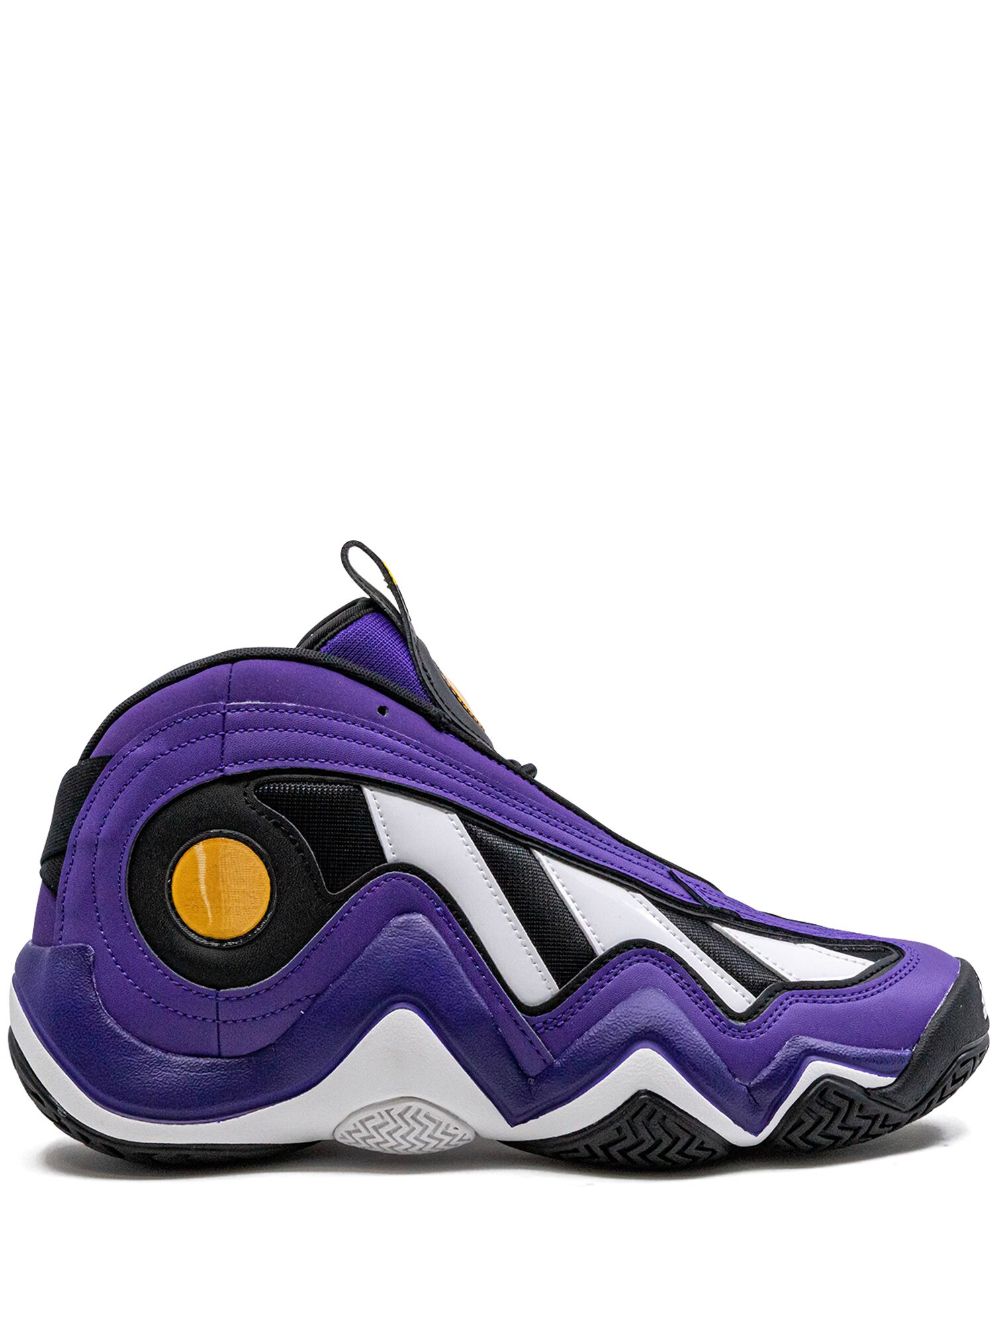 Best Deals for Kobe Bryant Shoes Adidas